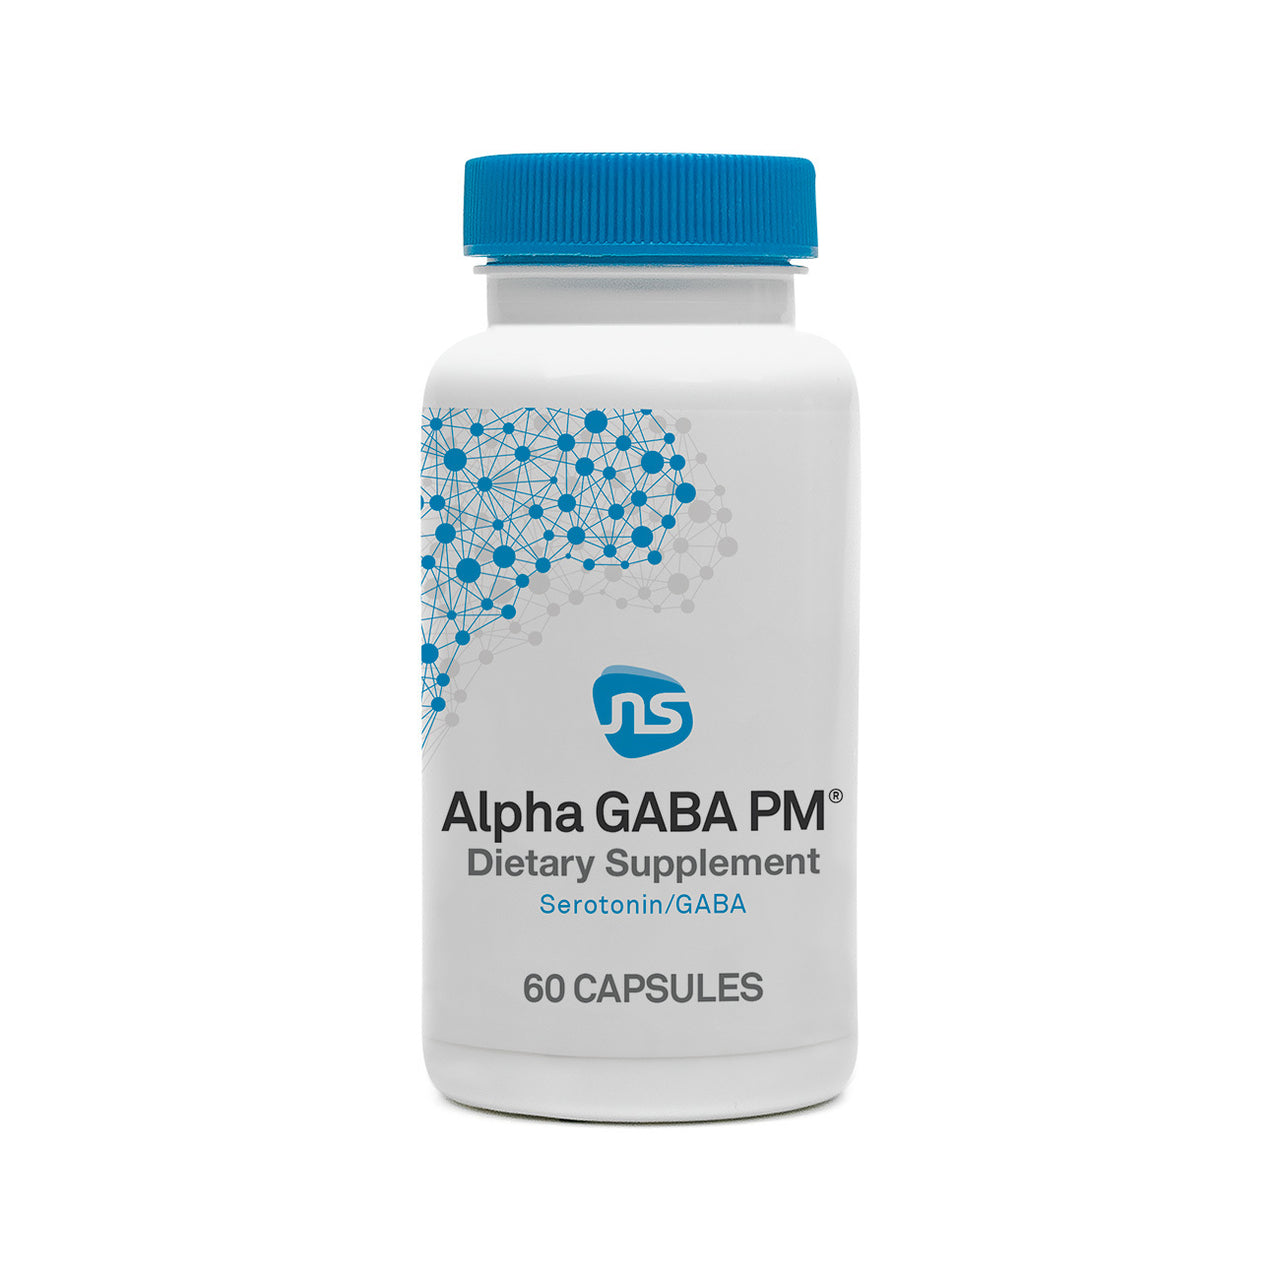 Alpha GABA PM - Neuroscience Inc - Researched blend of botanicals and 400 mg of L-theanine shown to induce calming brain waves and naturally improve sleep during times of stress*